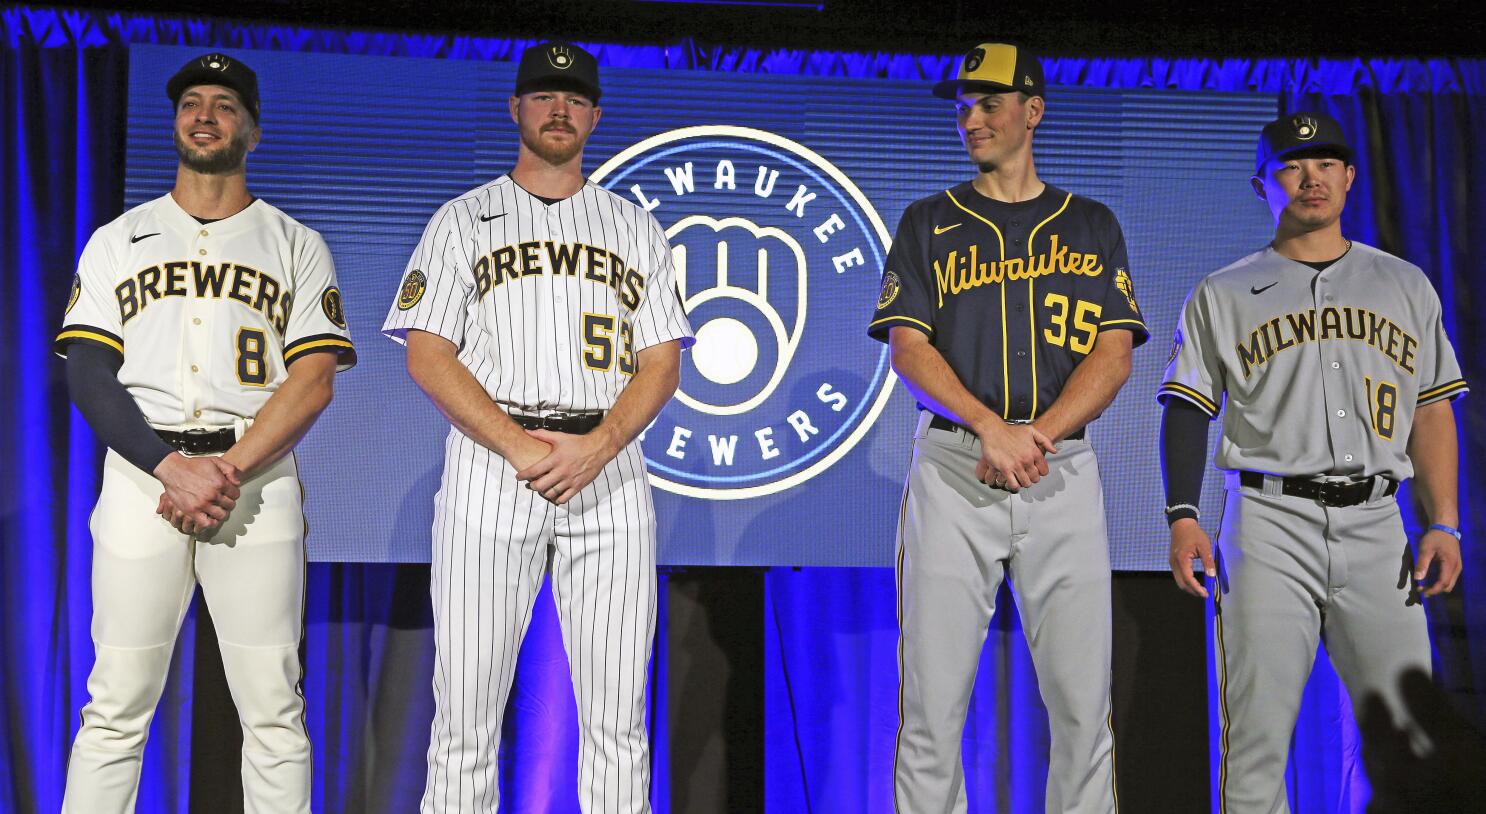 Milwaukee Brewers new uniforms feature ball-in-glove emblem as primary logo, Sports